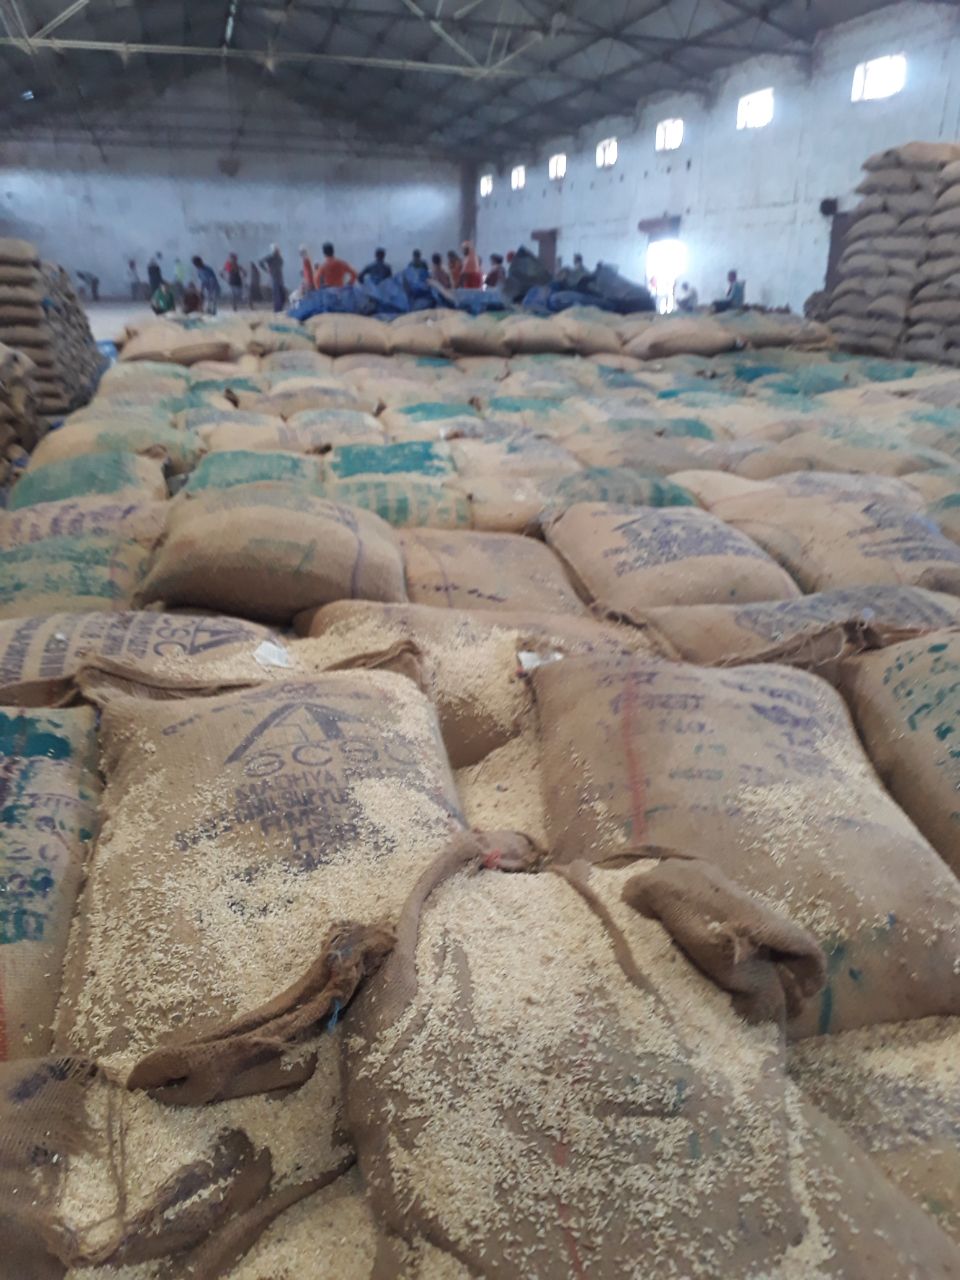 rice : 40 thousand quintal rice reject in warehouse